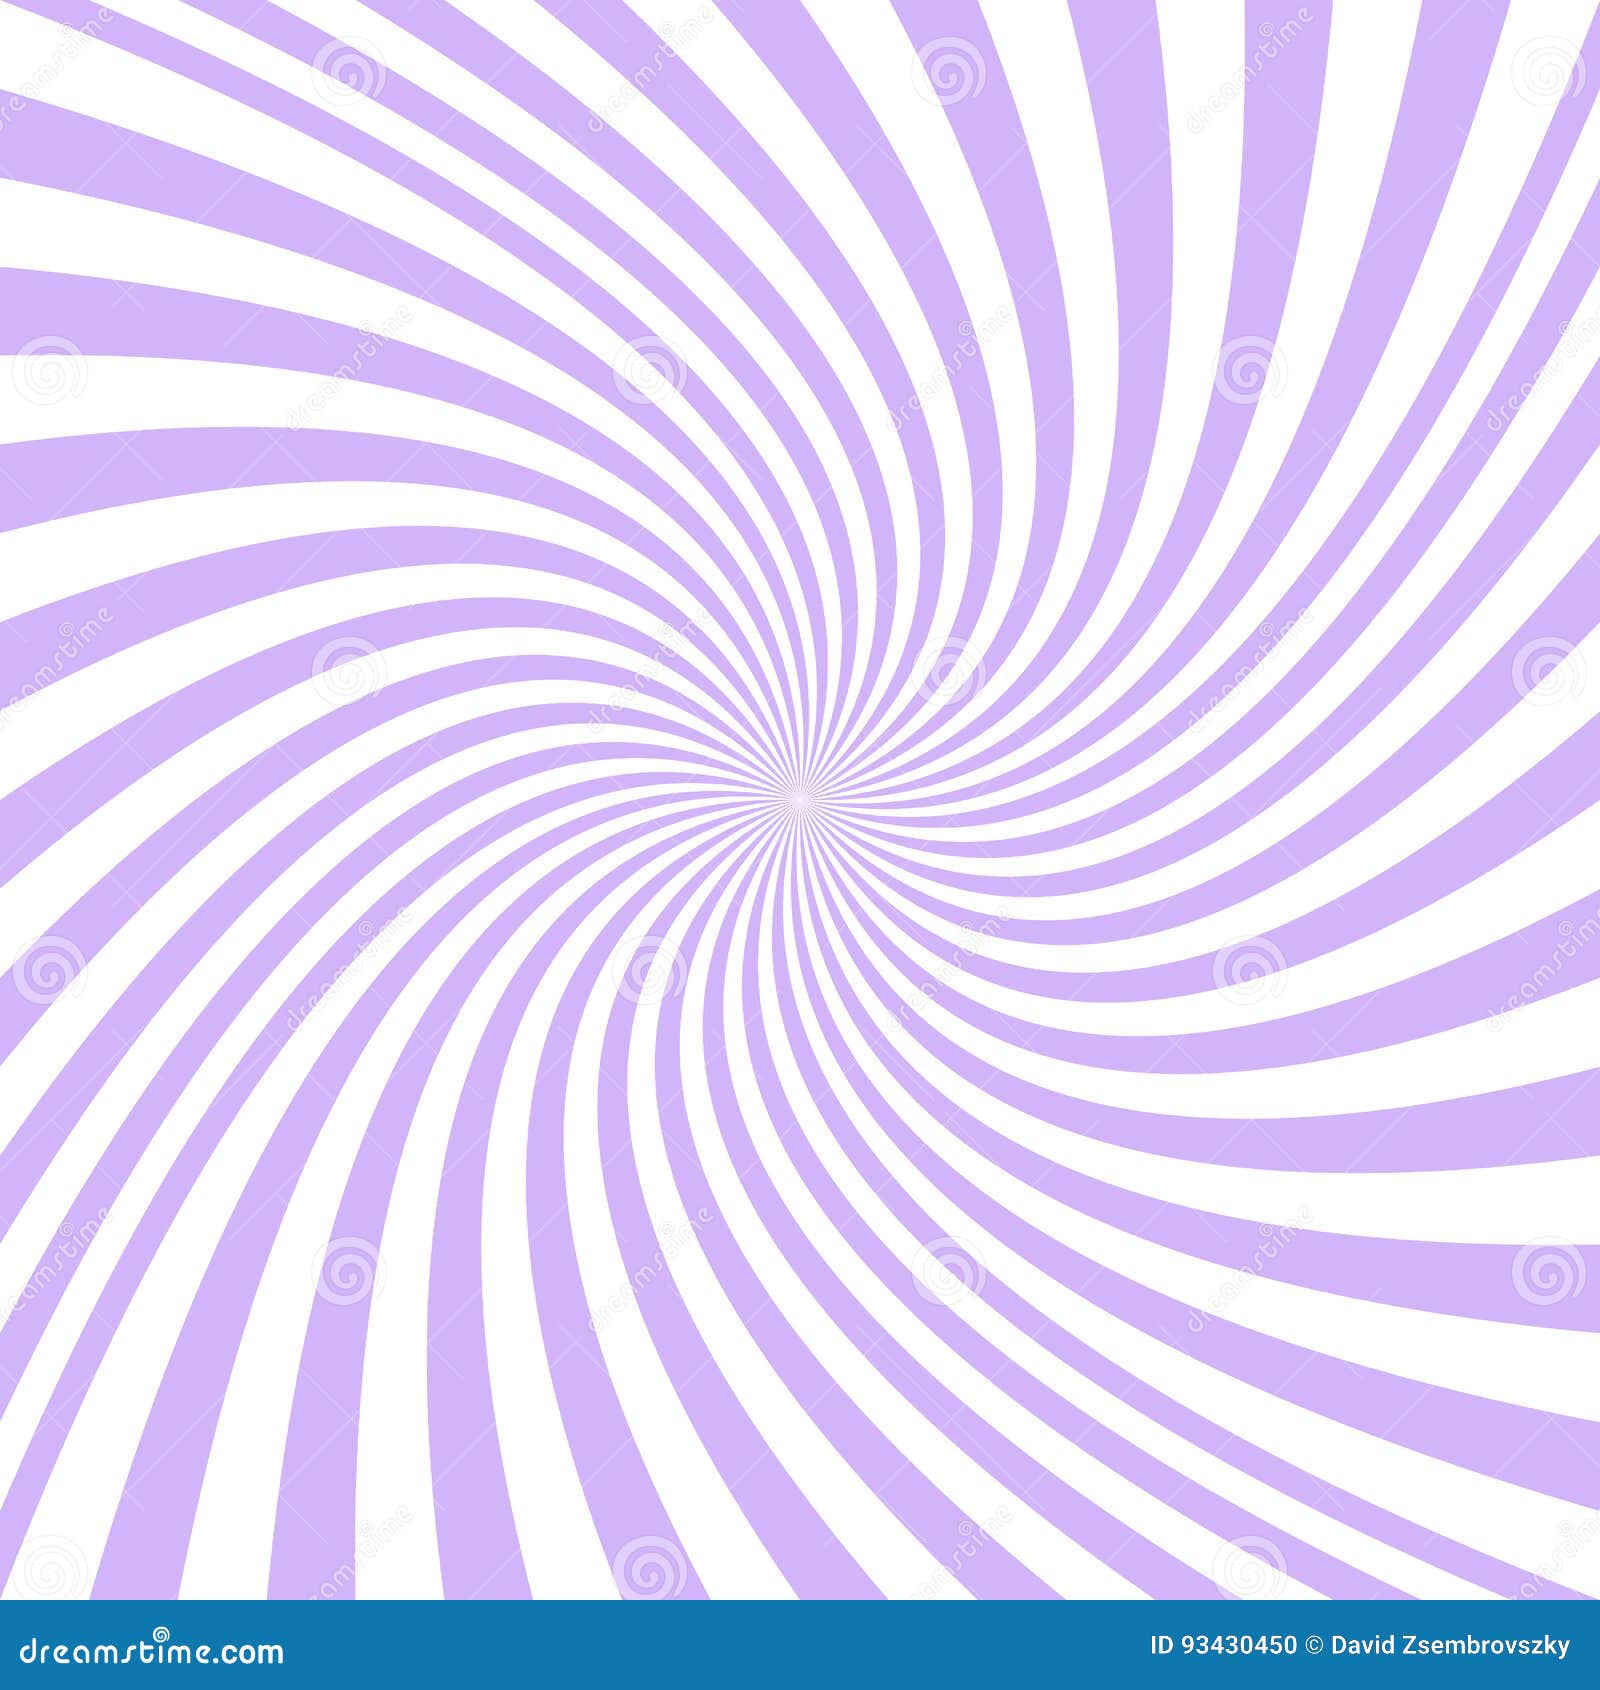 Spiral Background from Purple and White Rays Stock Vector ...